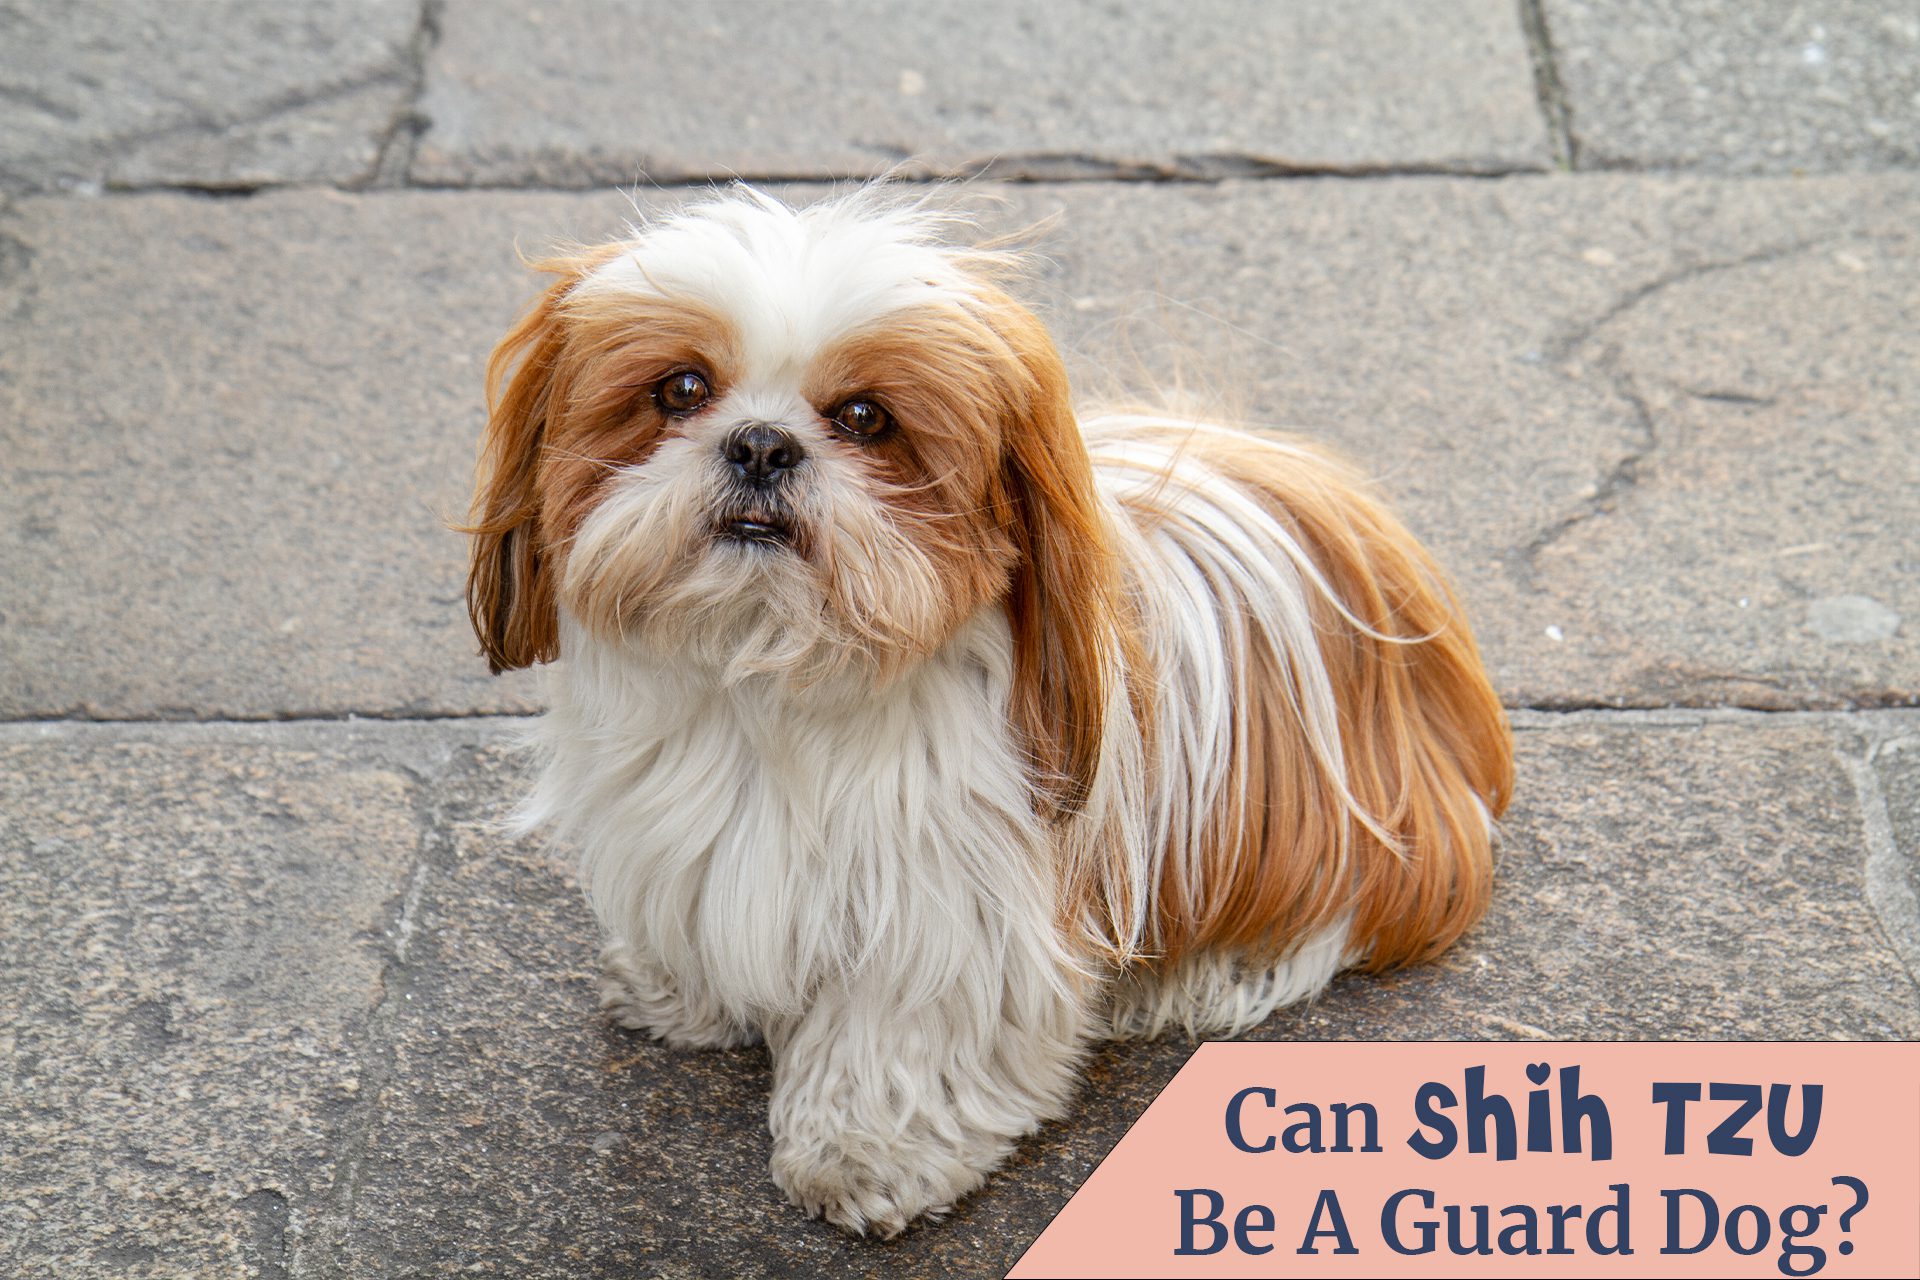 Can Shih Tzu be a guard dog? Considering the size and cuteness Shih Tzus do not match with the qualities of a good guard dog but they can be great watchdogs.